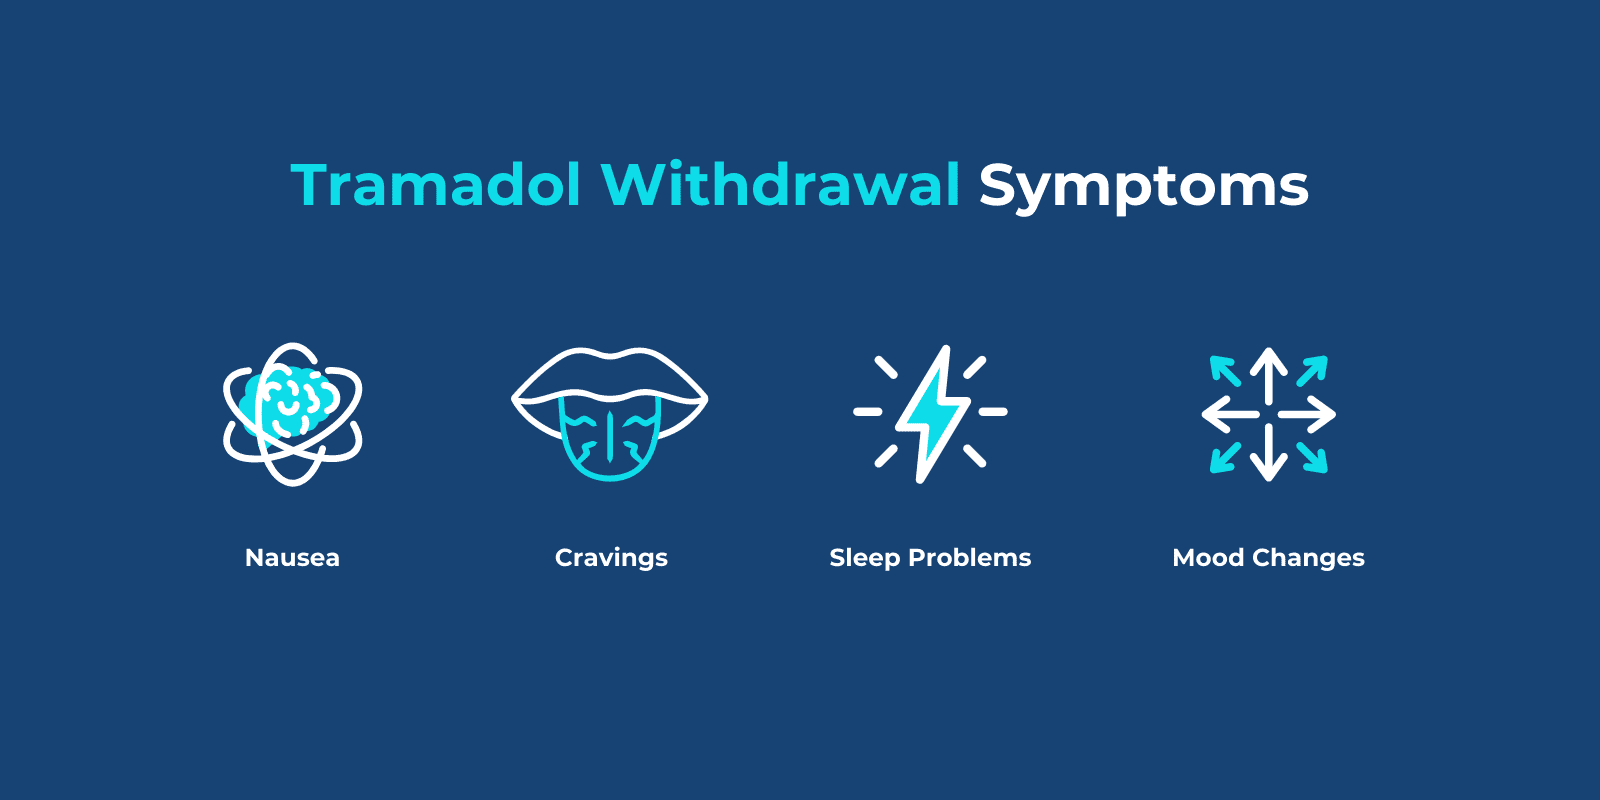 "Tramadol Withdrawal Symptoms" and list of symptoms and relevant icons illustrated